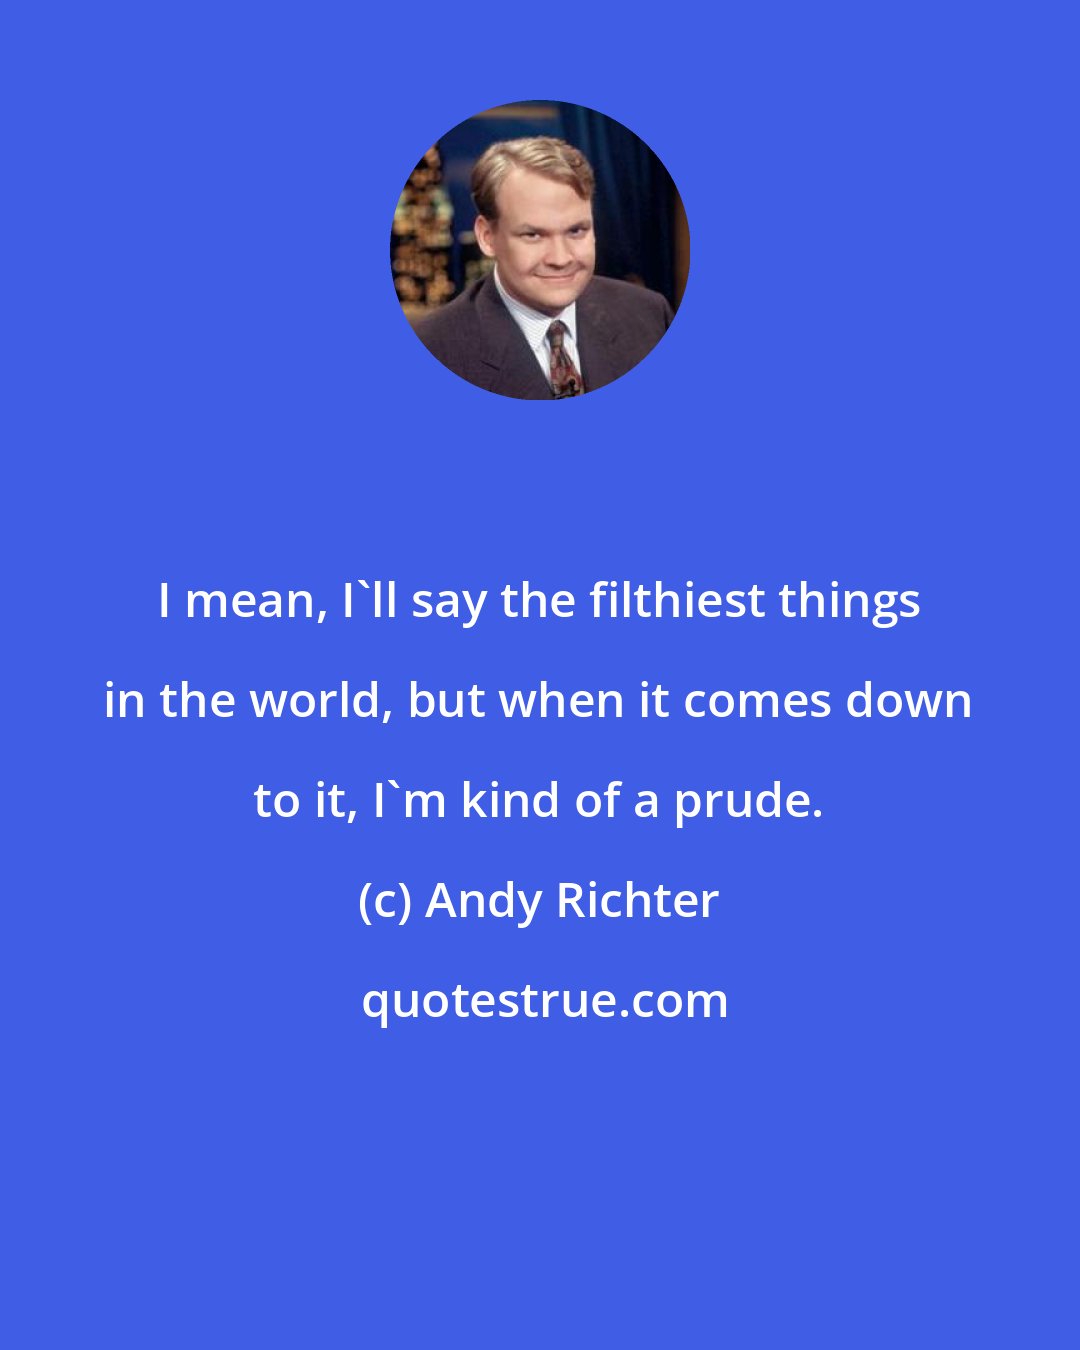 Andy Richter: I mean, I'll say the filthiest things in the world, but when it comes down to it, I'm kind of a prude.